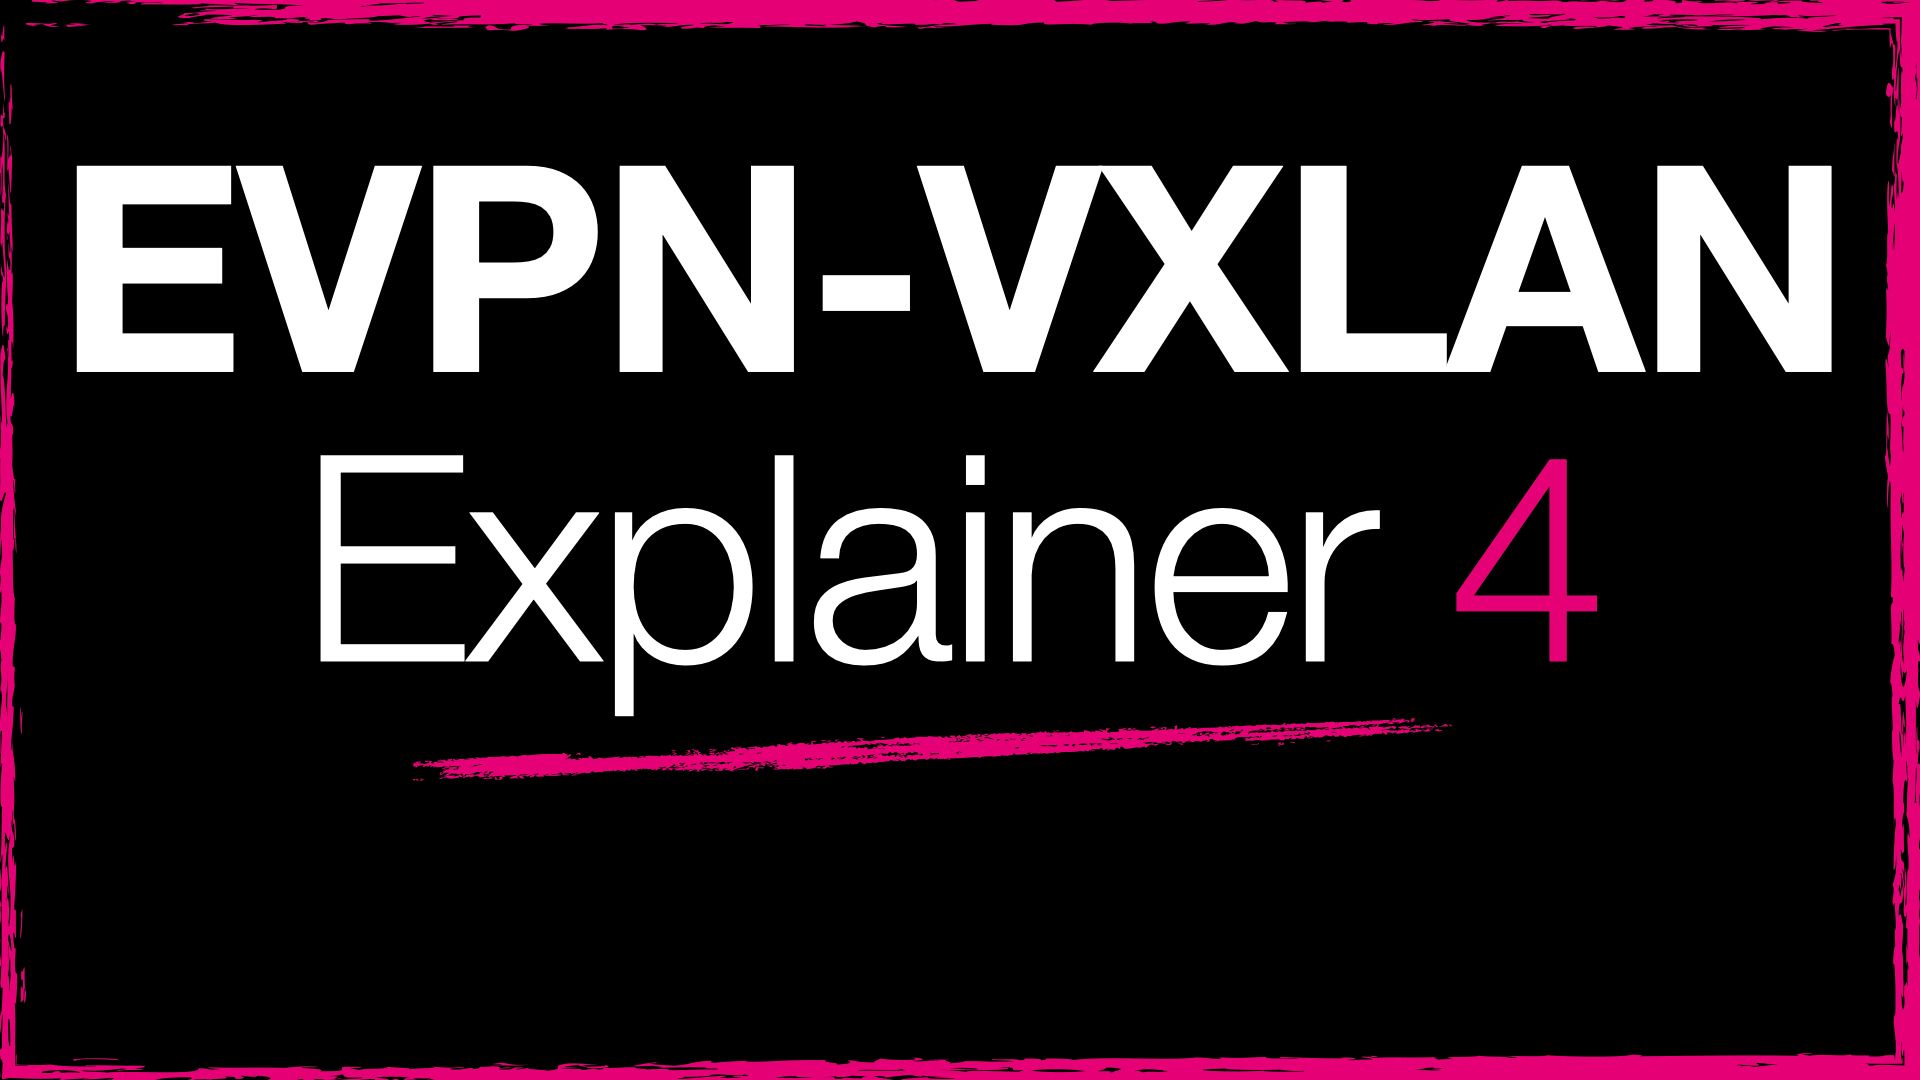 EVPN-VXLAN Explainer 4 - Route Type Three and Auto-Discovery